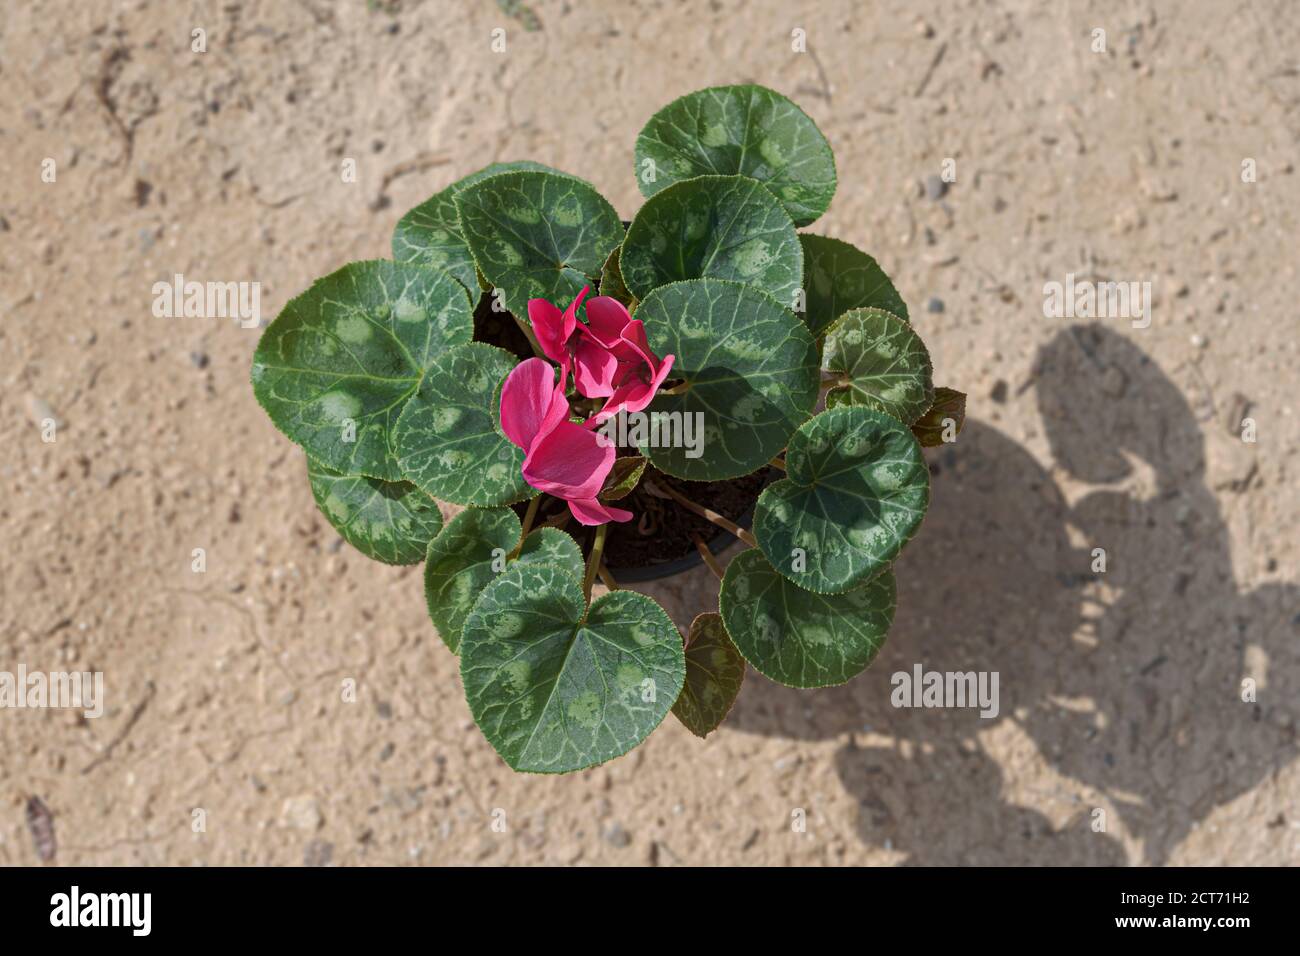 a potted persian cyclamen rakefet plant with three open magenta flowers on a blurred beige sand background showing the beautifully marked leaves Stock Photo